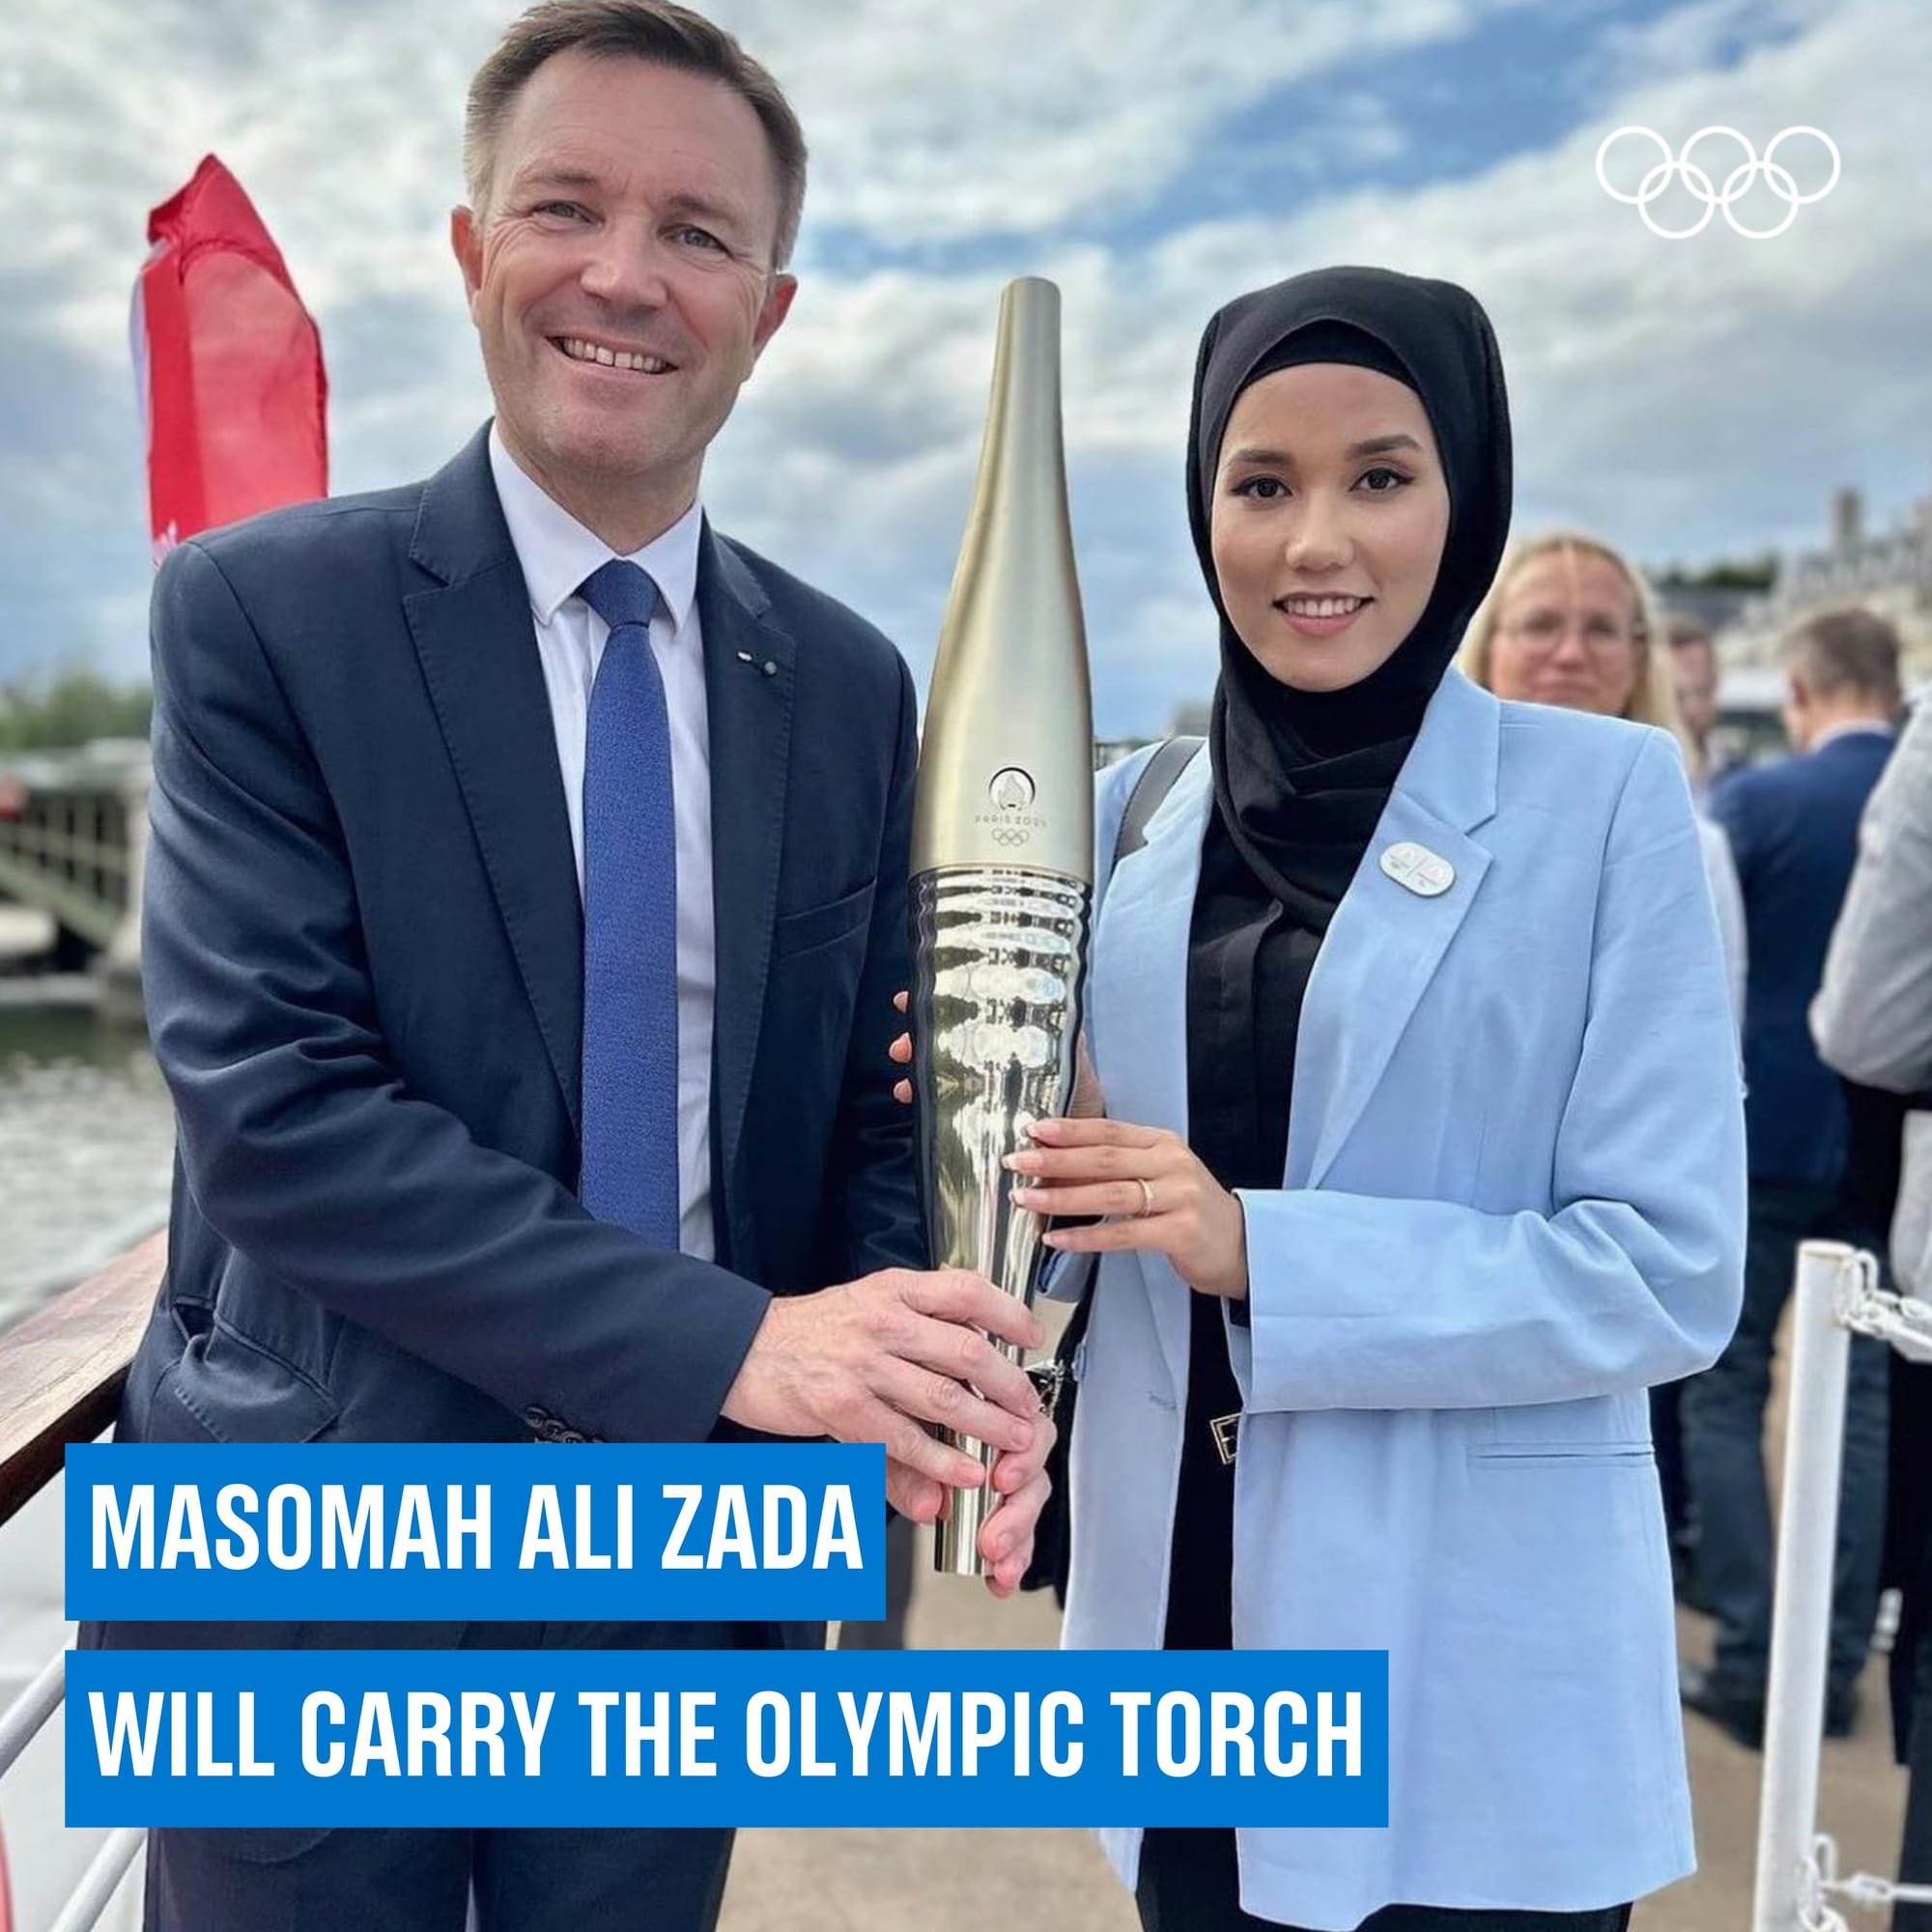 MASOMAH ALI ZADAWILL CARRY THE OLYMPIC TORCH